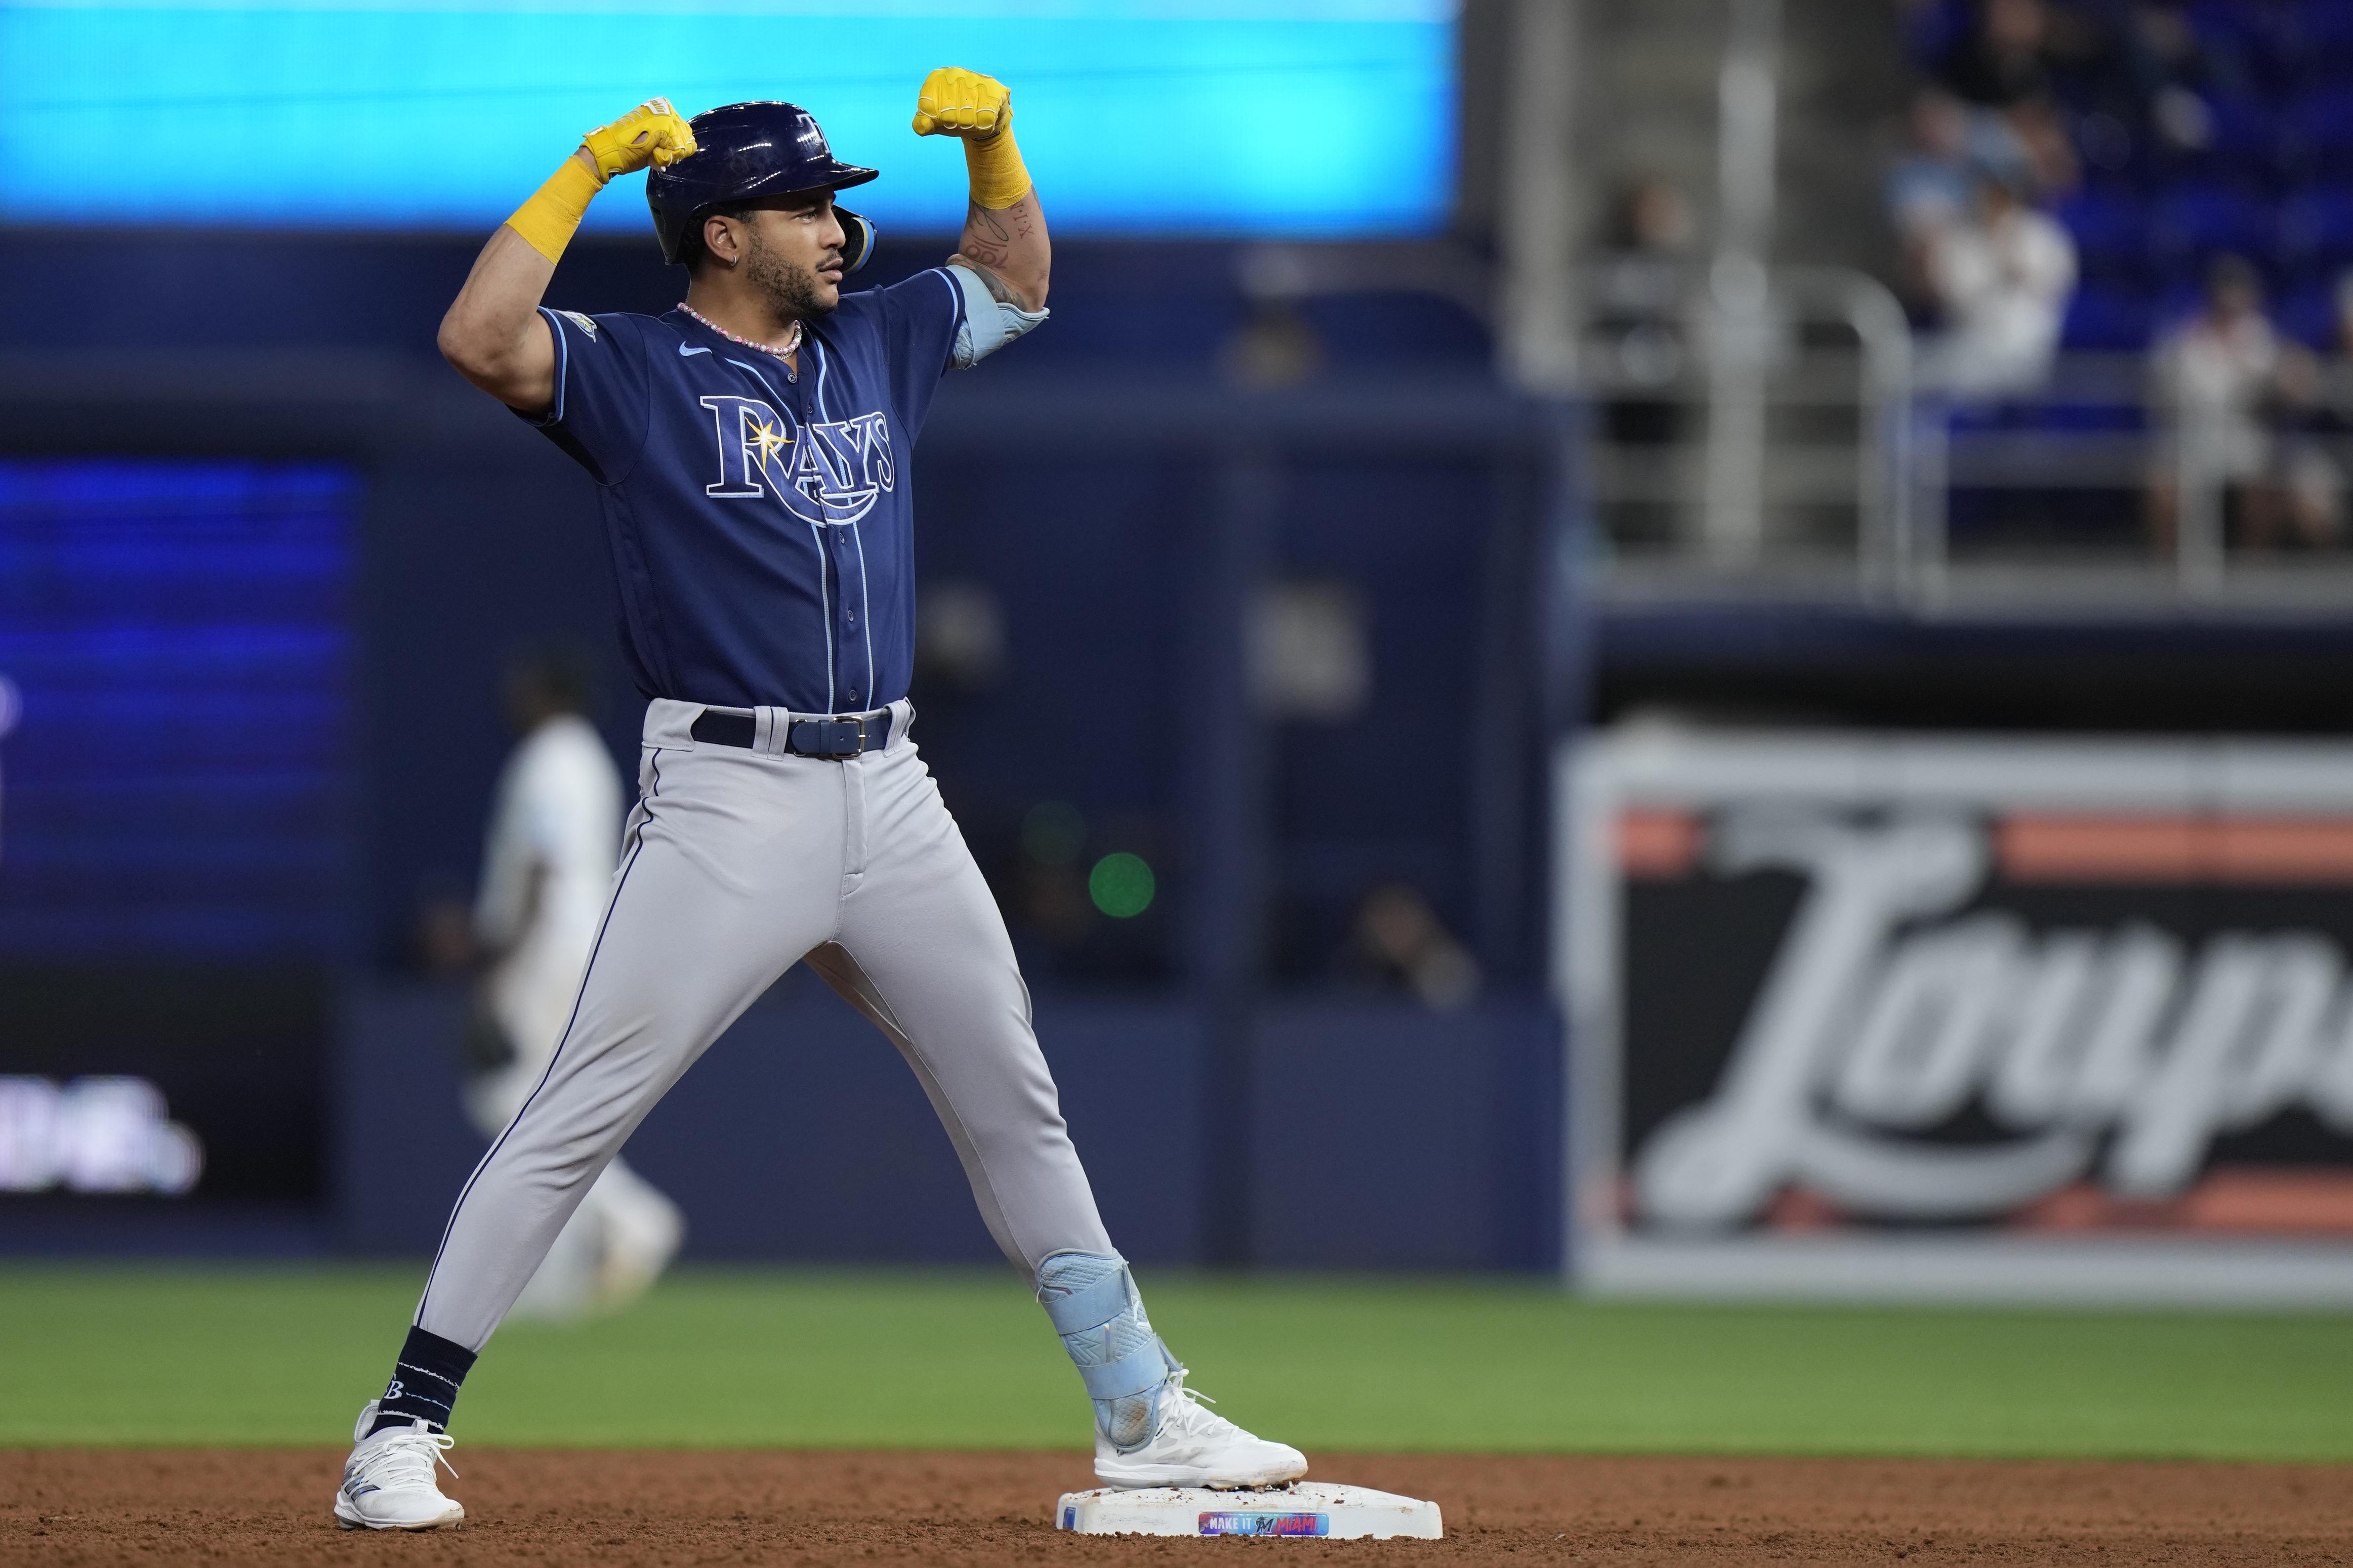 Aaron Judge's two-homer day leads Yankees past Rays, 9-8